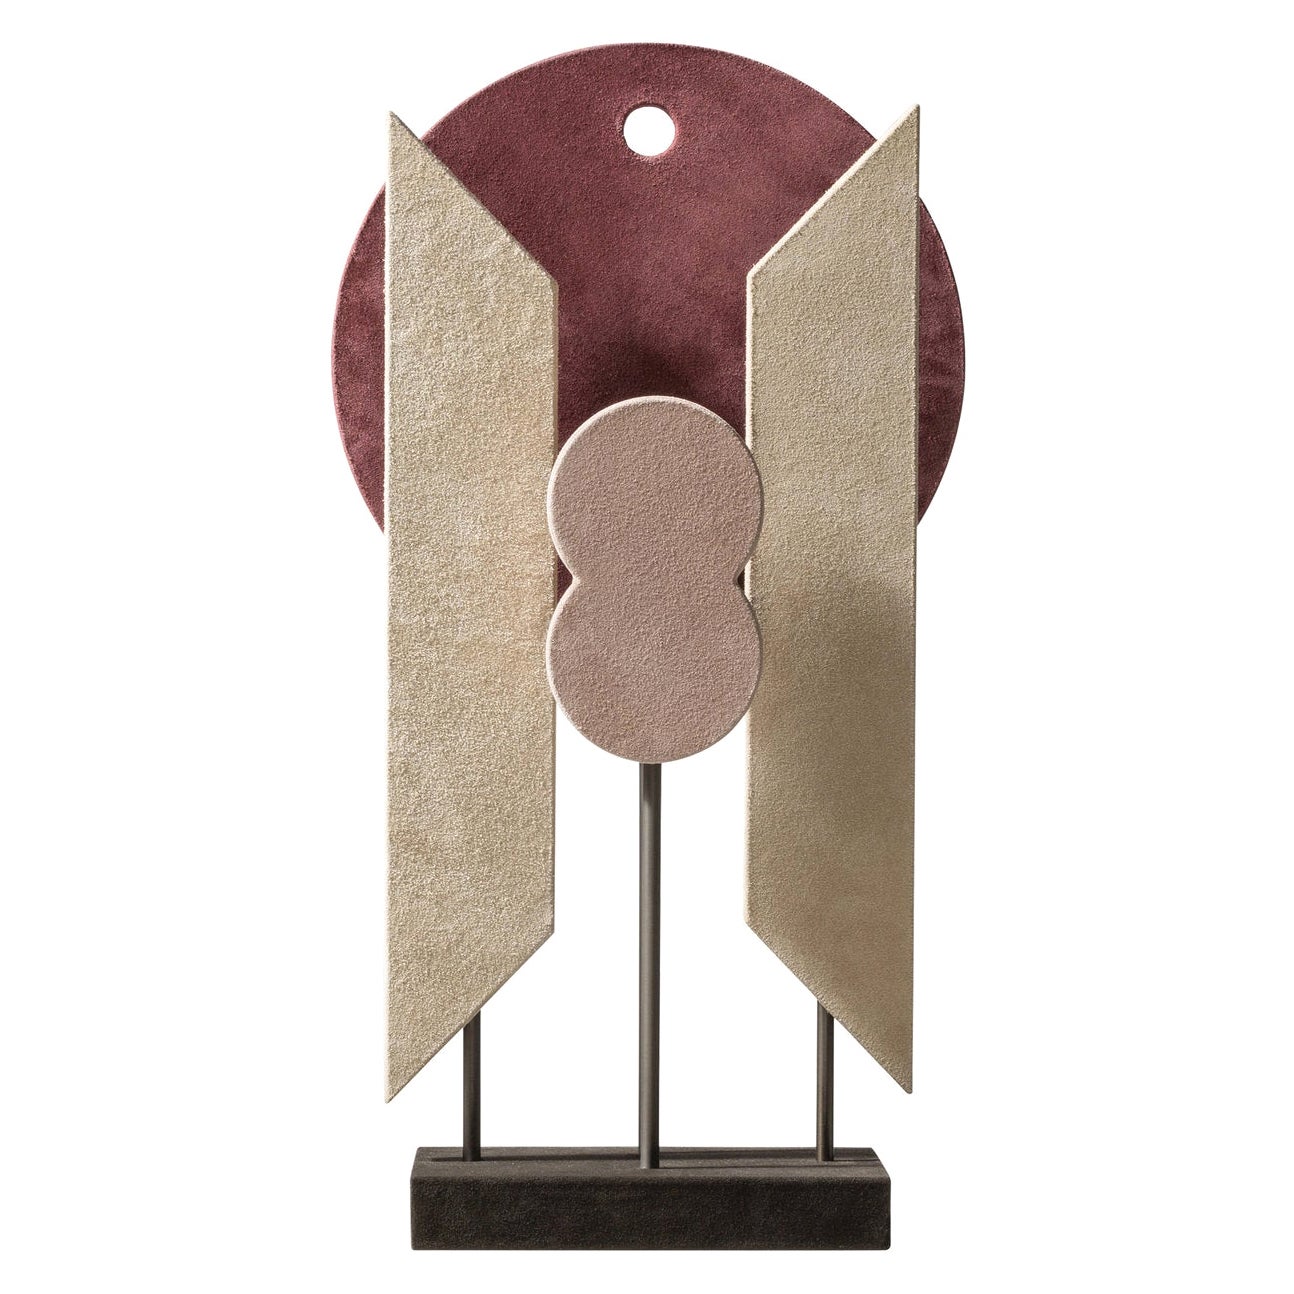 Contemporary Leather Sculpture, Tabou 2 by Stephane Parmentier for Giobagnara